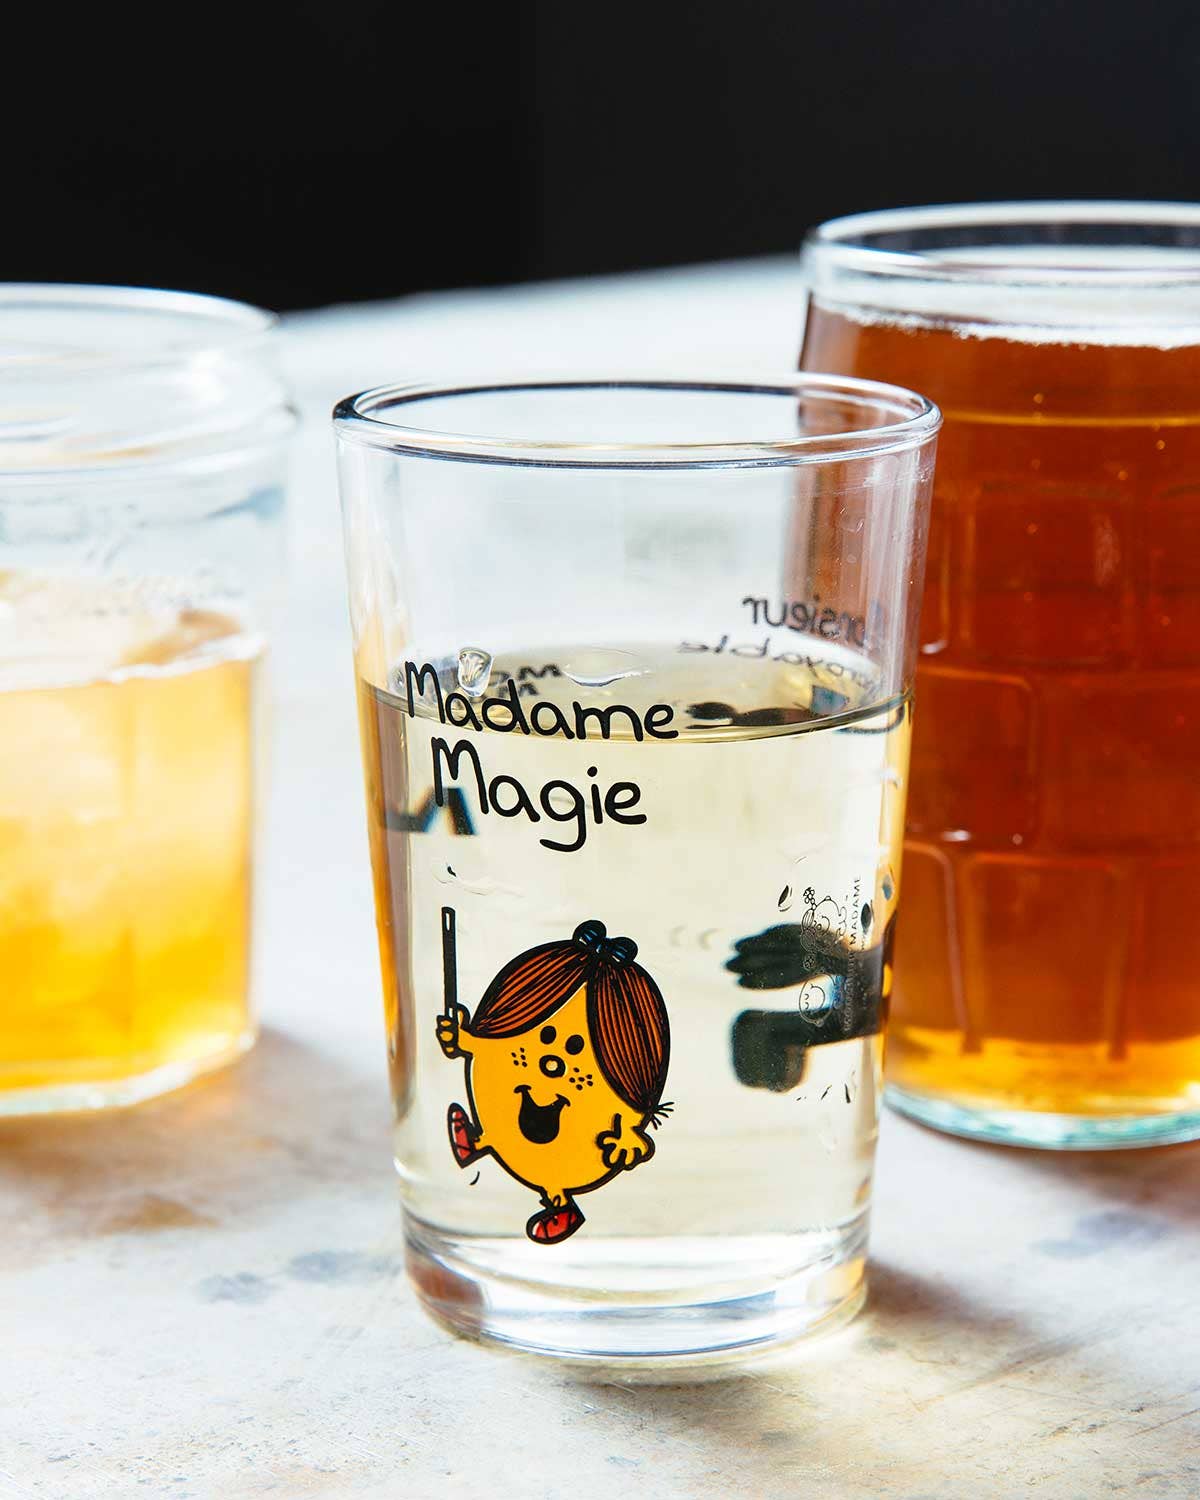 The Prettiest Mustard and Jam Jars That Double as Great Glassware